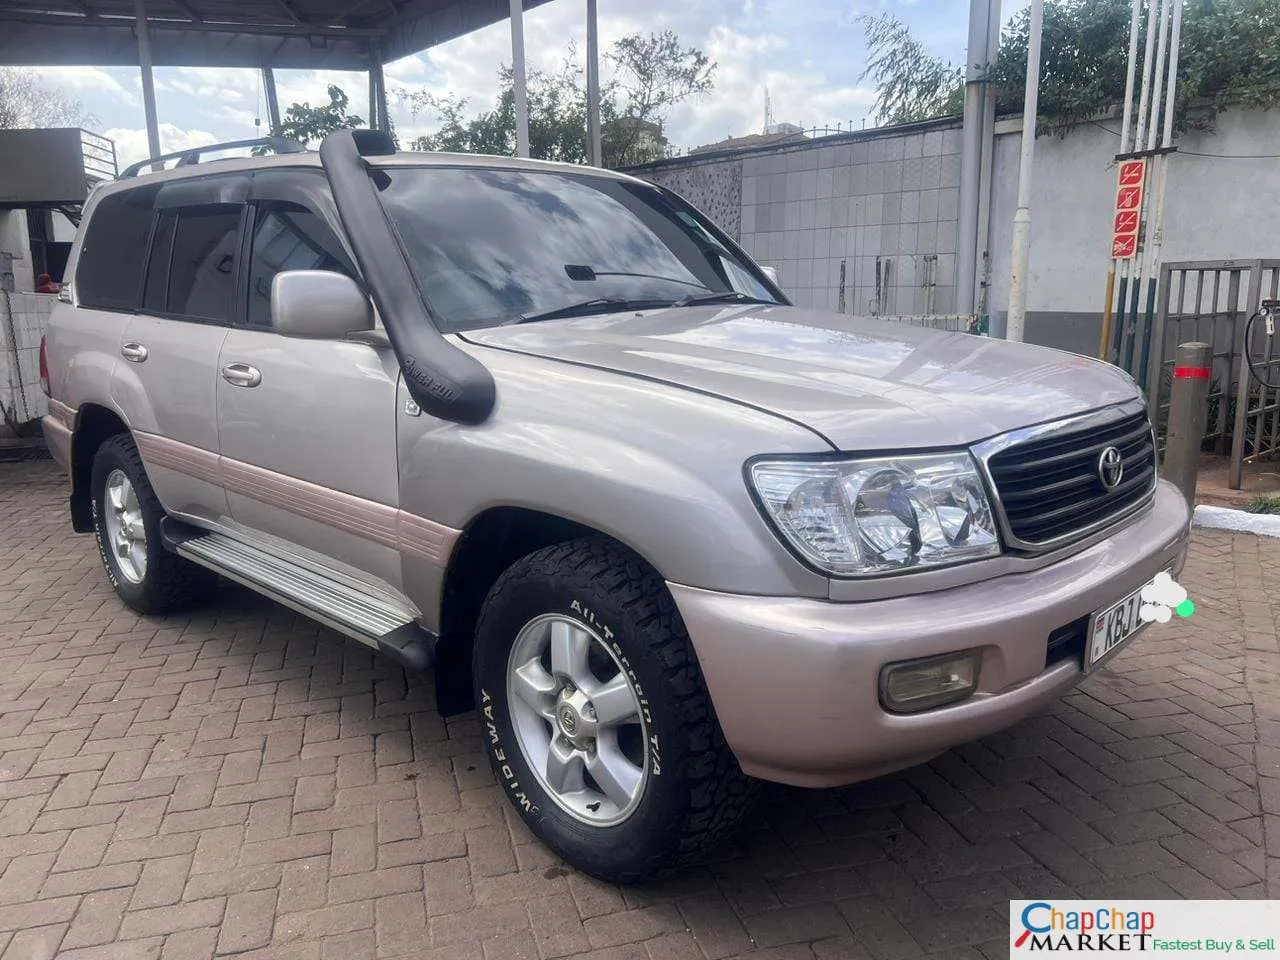 Toyota Land Cruiser 100 series AMAZON 4.2 DIESEL 100 SERIES You Pay 30% Deposit Trade in Ok EXCLUSIVE hire purchase installments Kenya